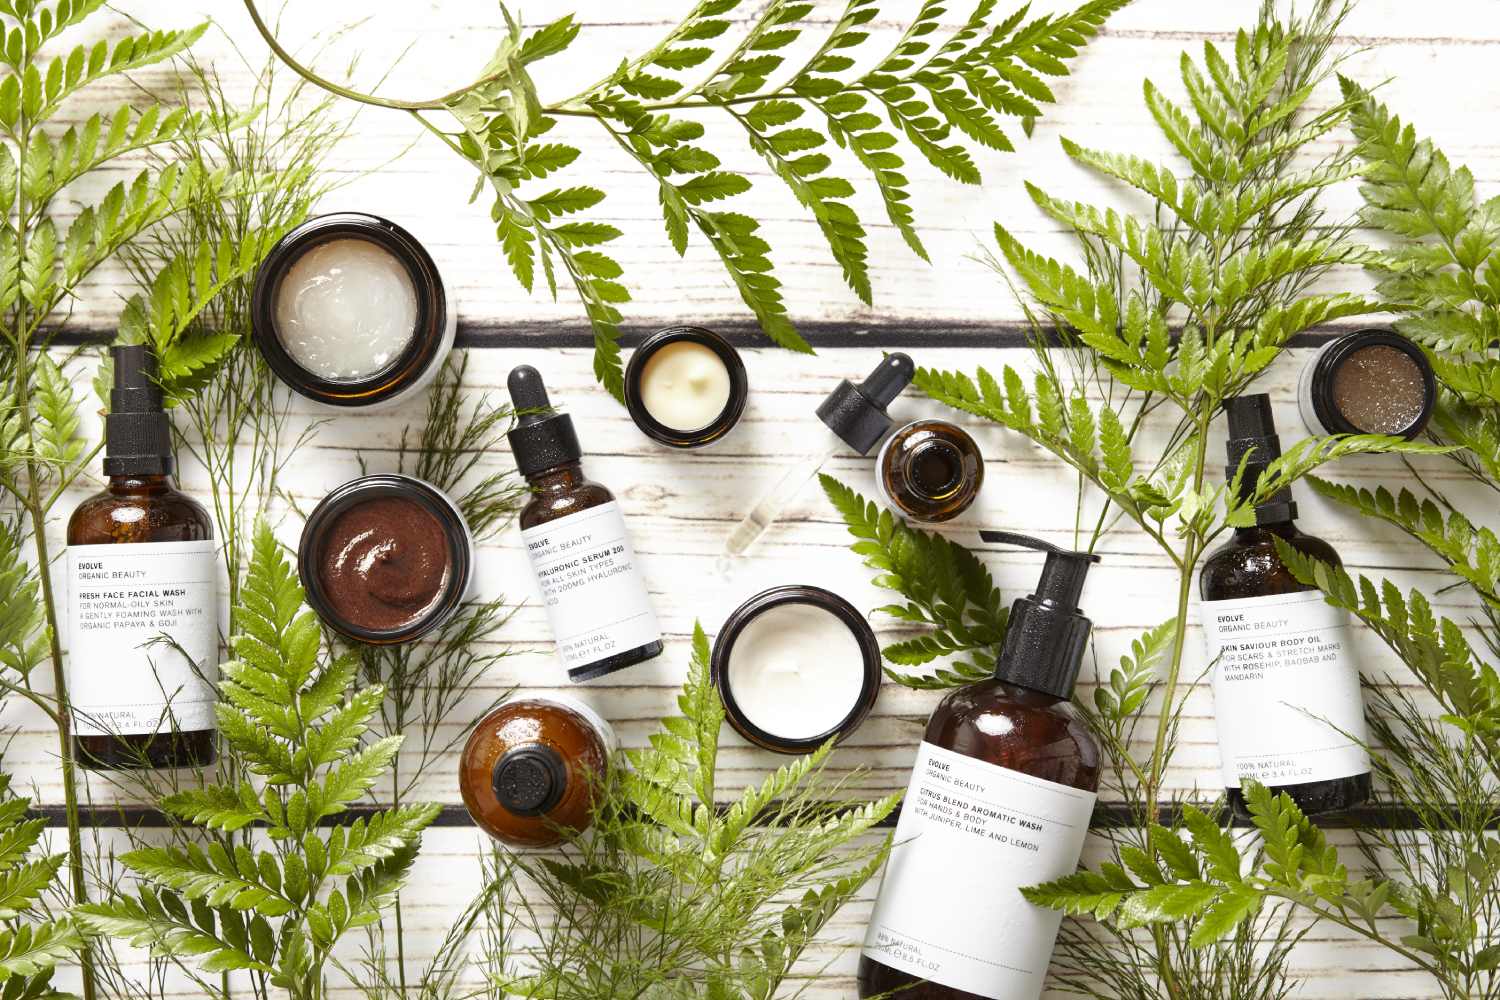 Evolve Organic Beauty Simplifies Natural Skincare · Care to Beauty